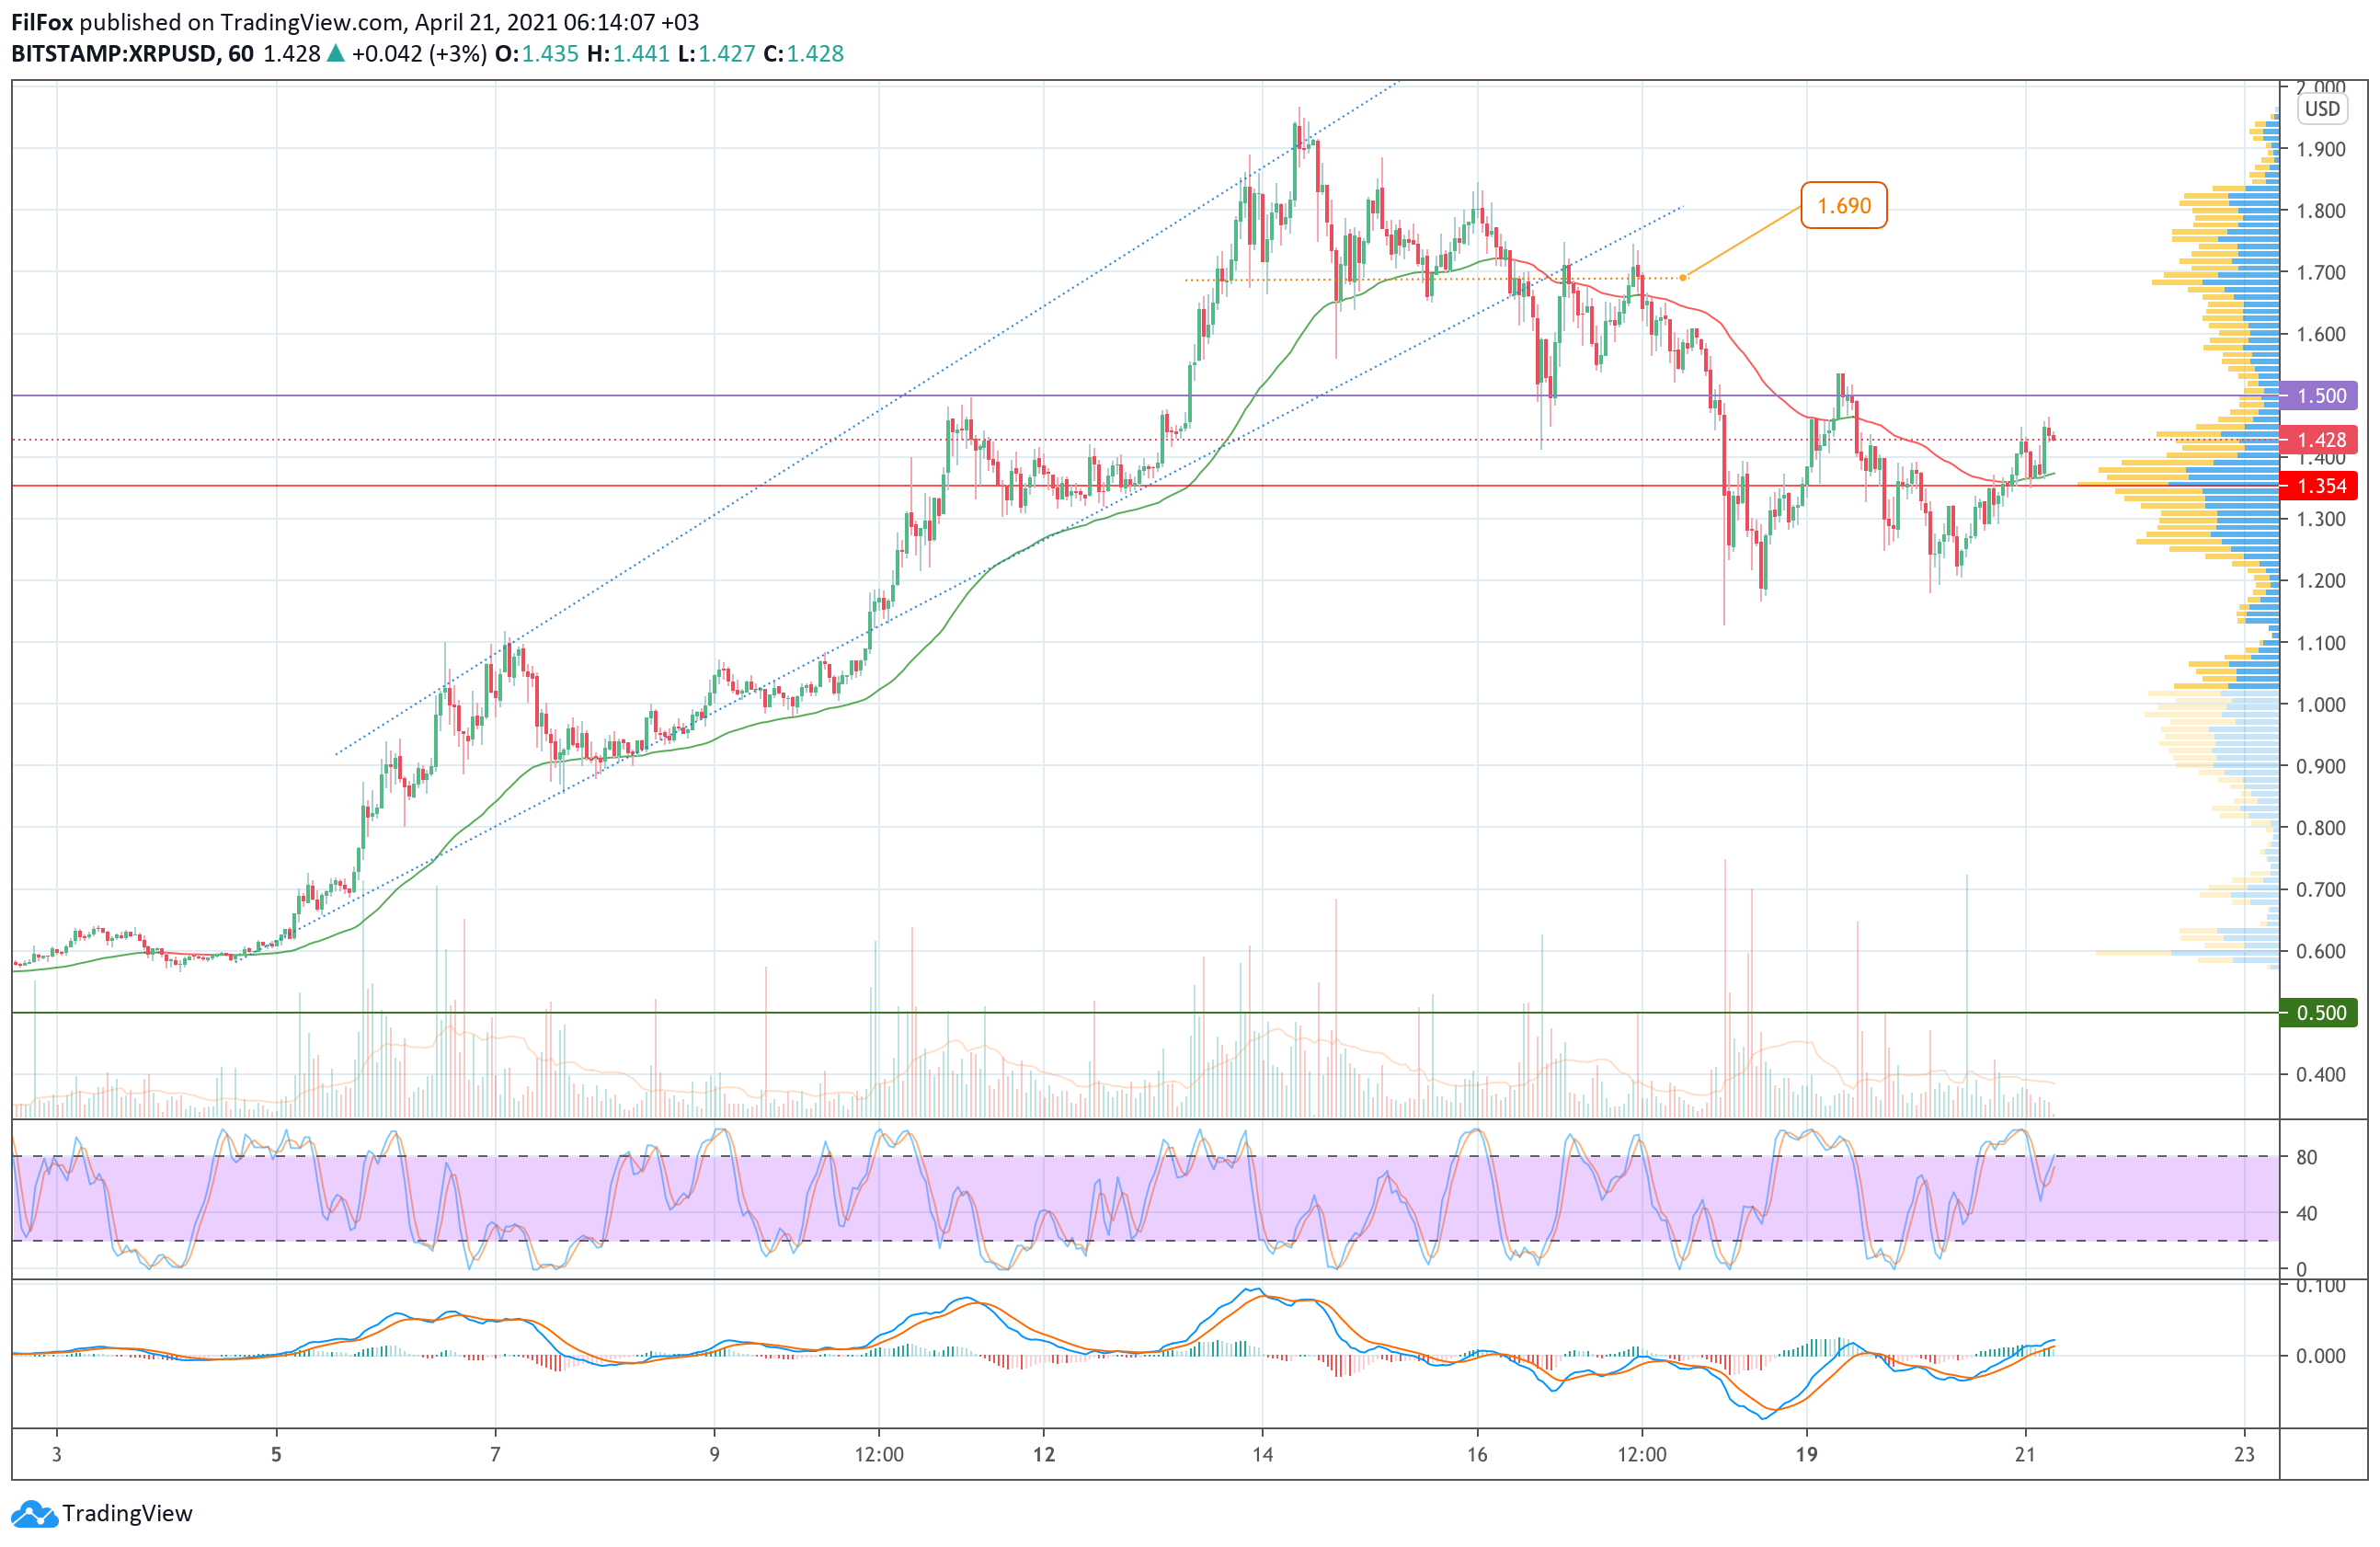 Analysis of the prices of Bitcoin, Ethereum, XRP for 04/21/2021